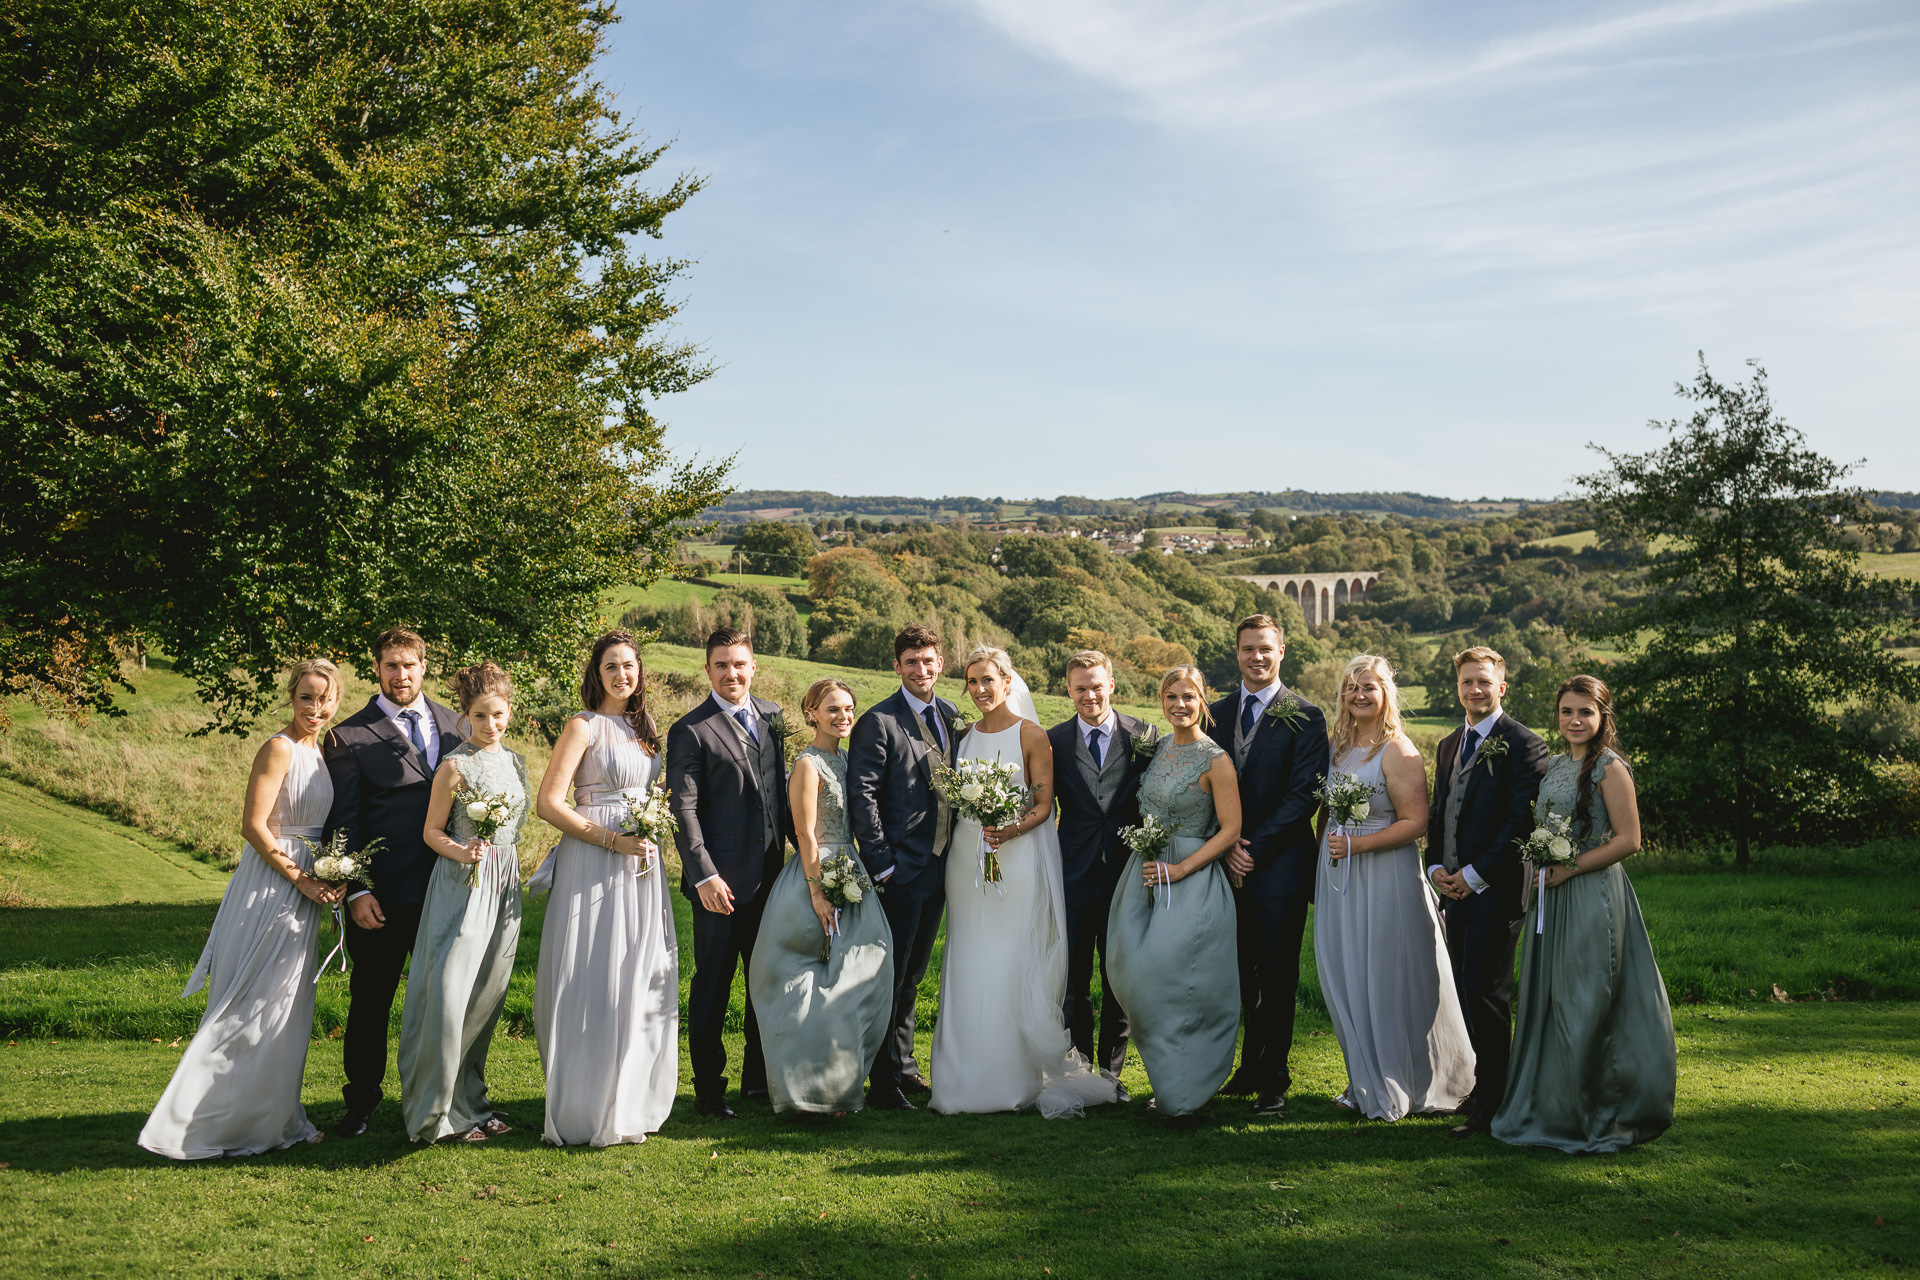 Bridal party group photo at The Grange Belluton, with Pensford Viaduct behind